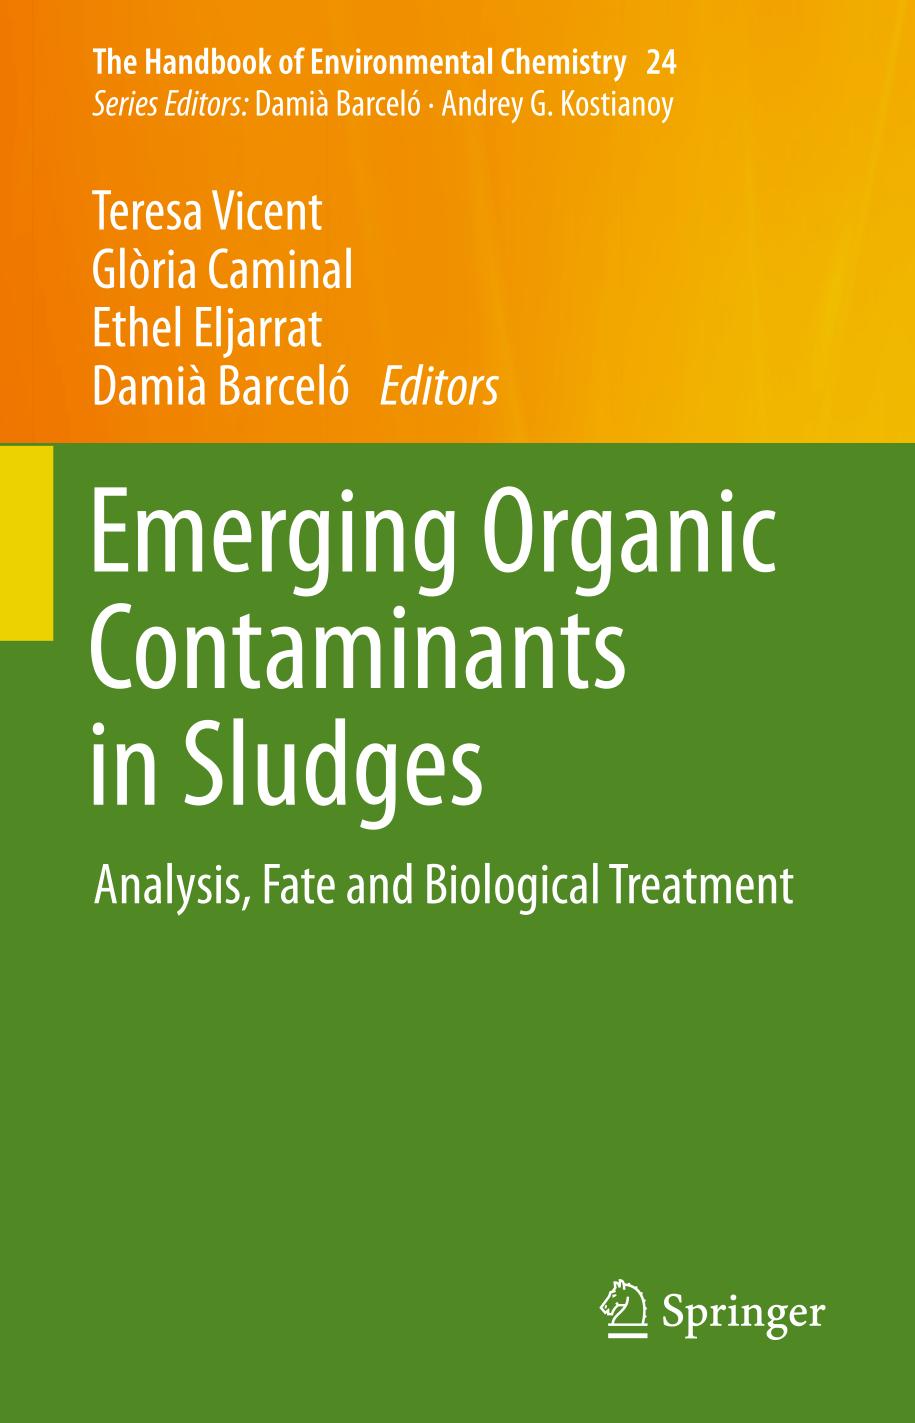 Emerging Organic Contaminants in Sludges Analysis, Fate and Biological Treatment